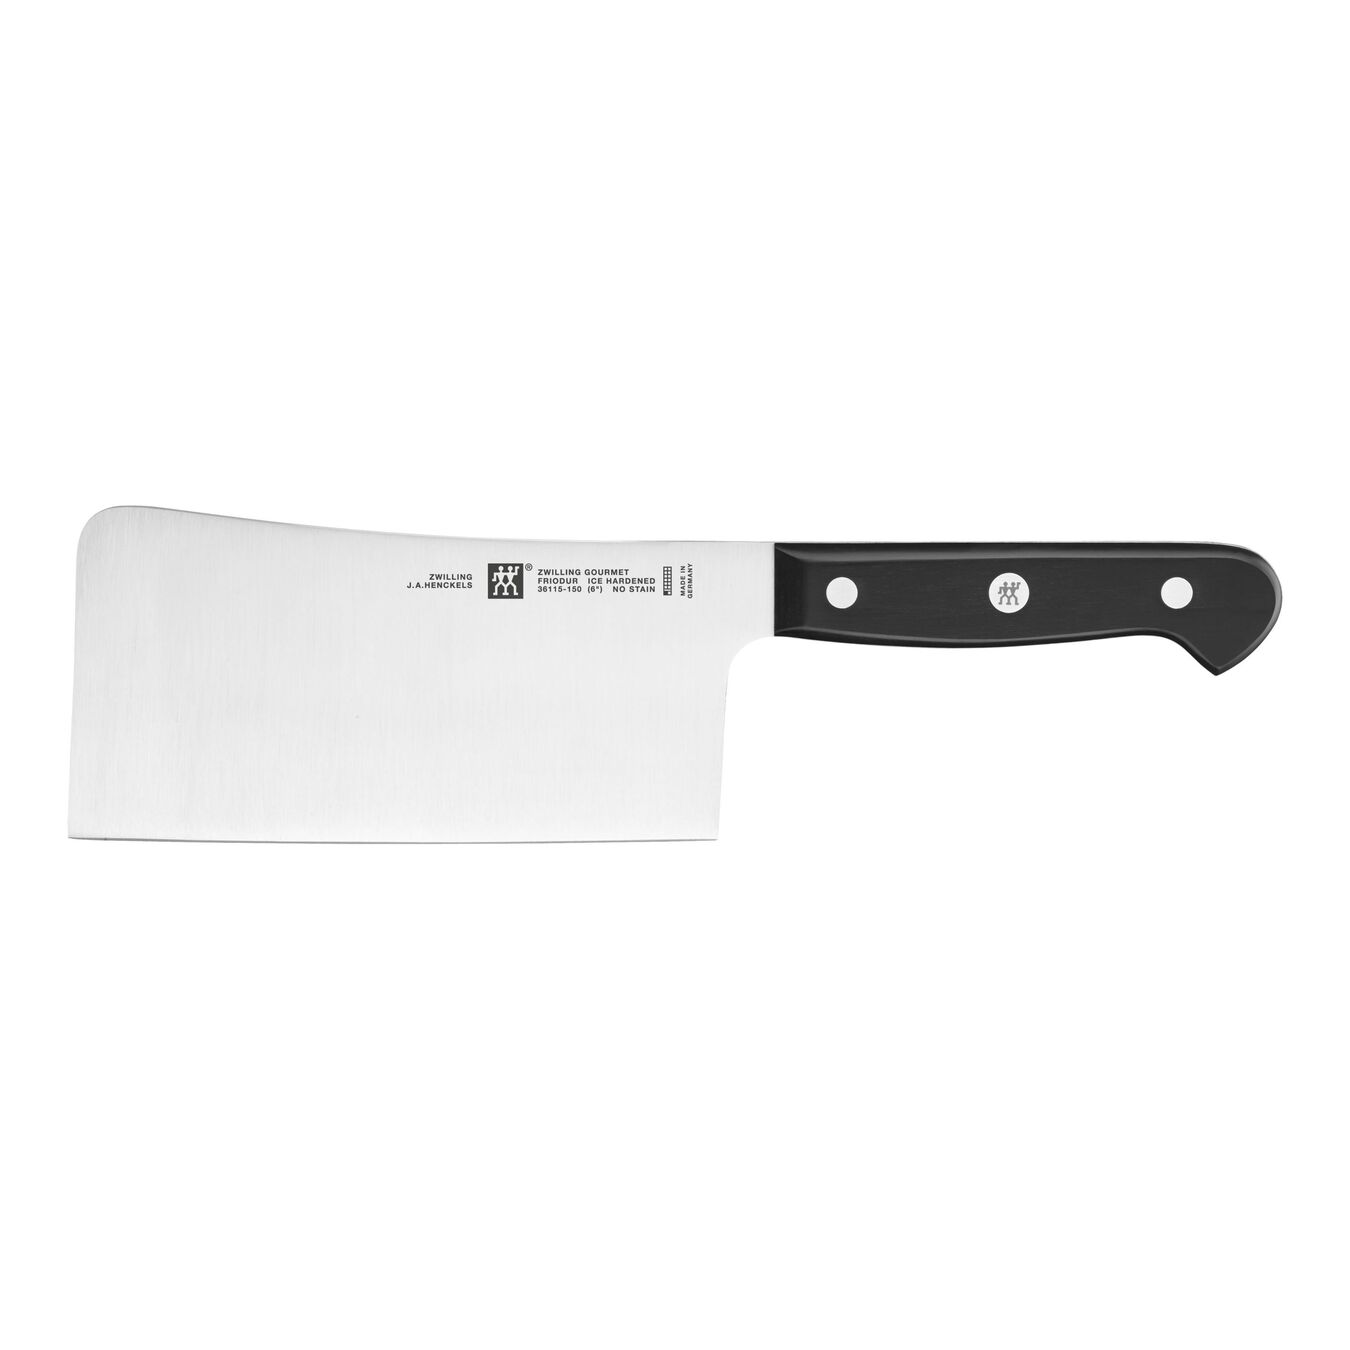 6 inch Cleaver,,large 1